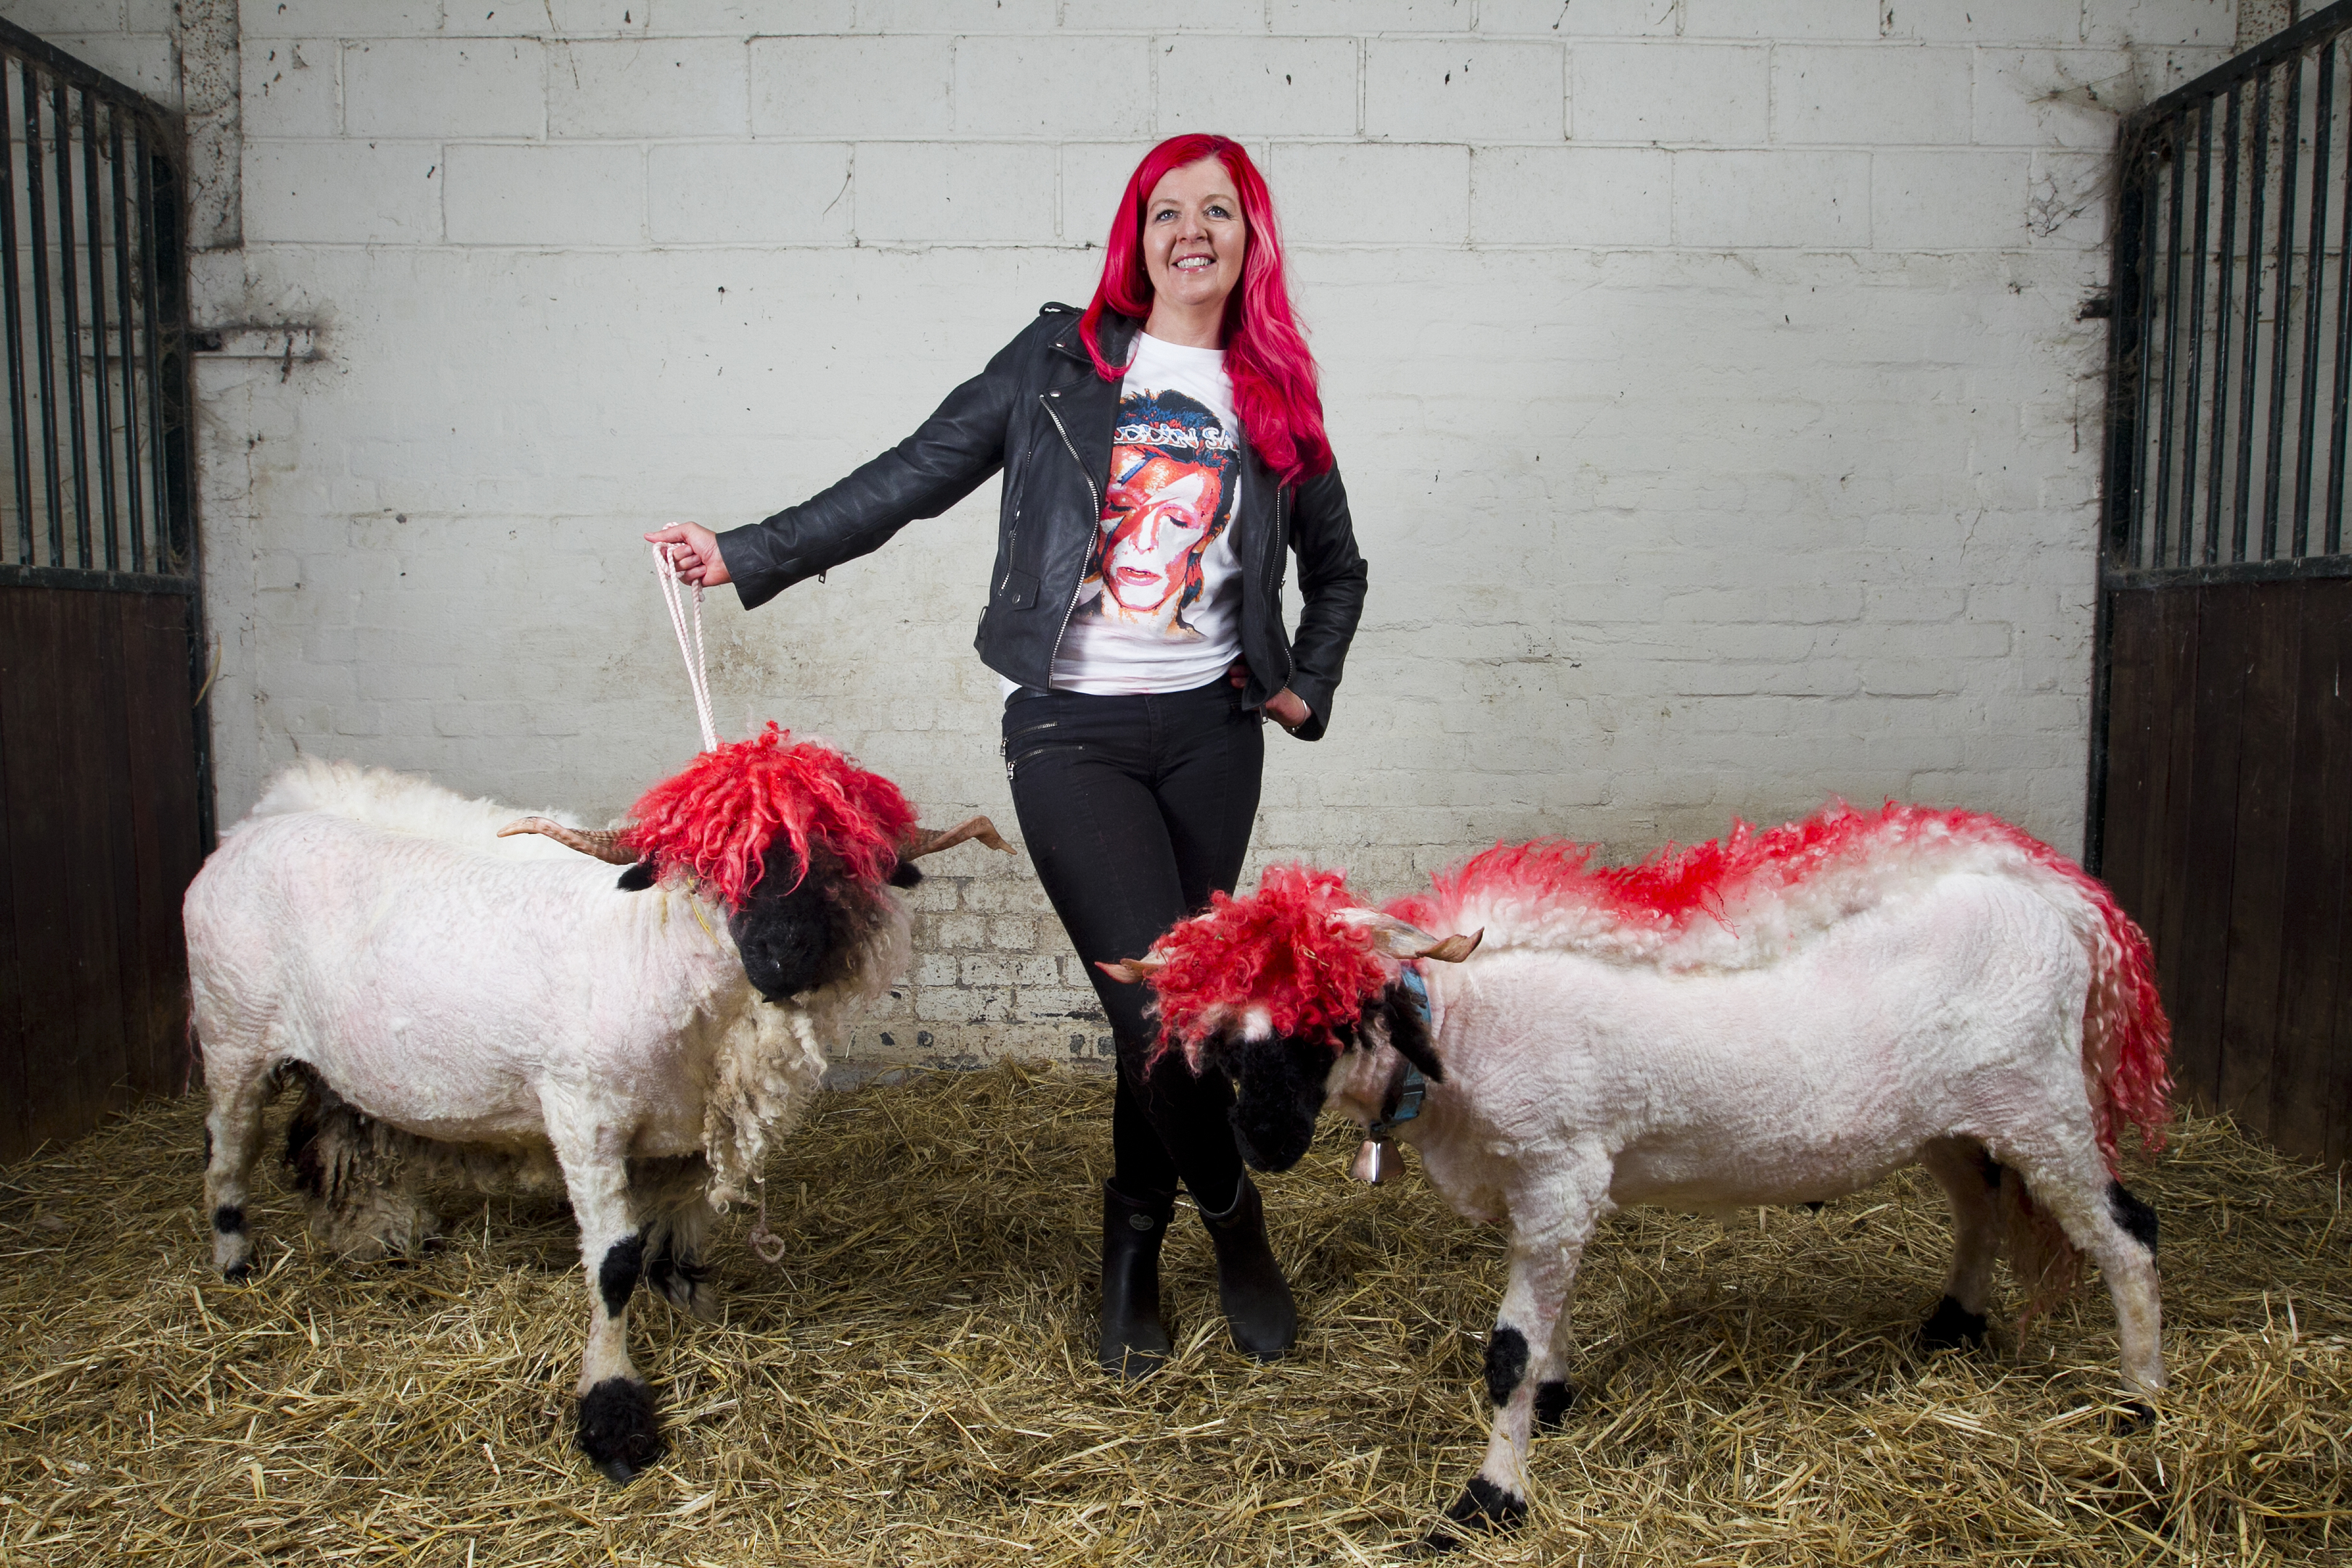 Ali Thom with Mia and Macallan the sheep (Andrew Cawley / DC Thomson)